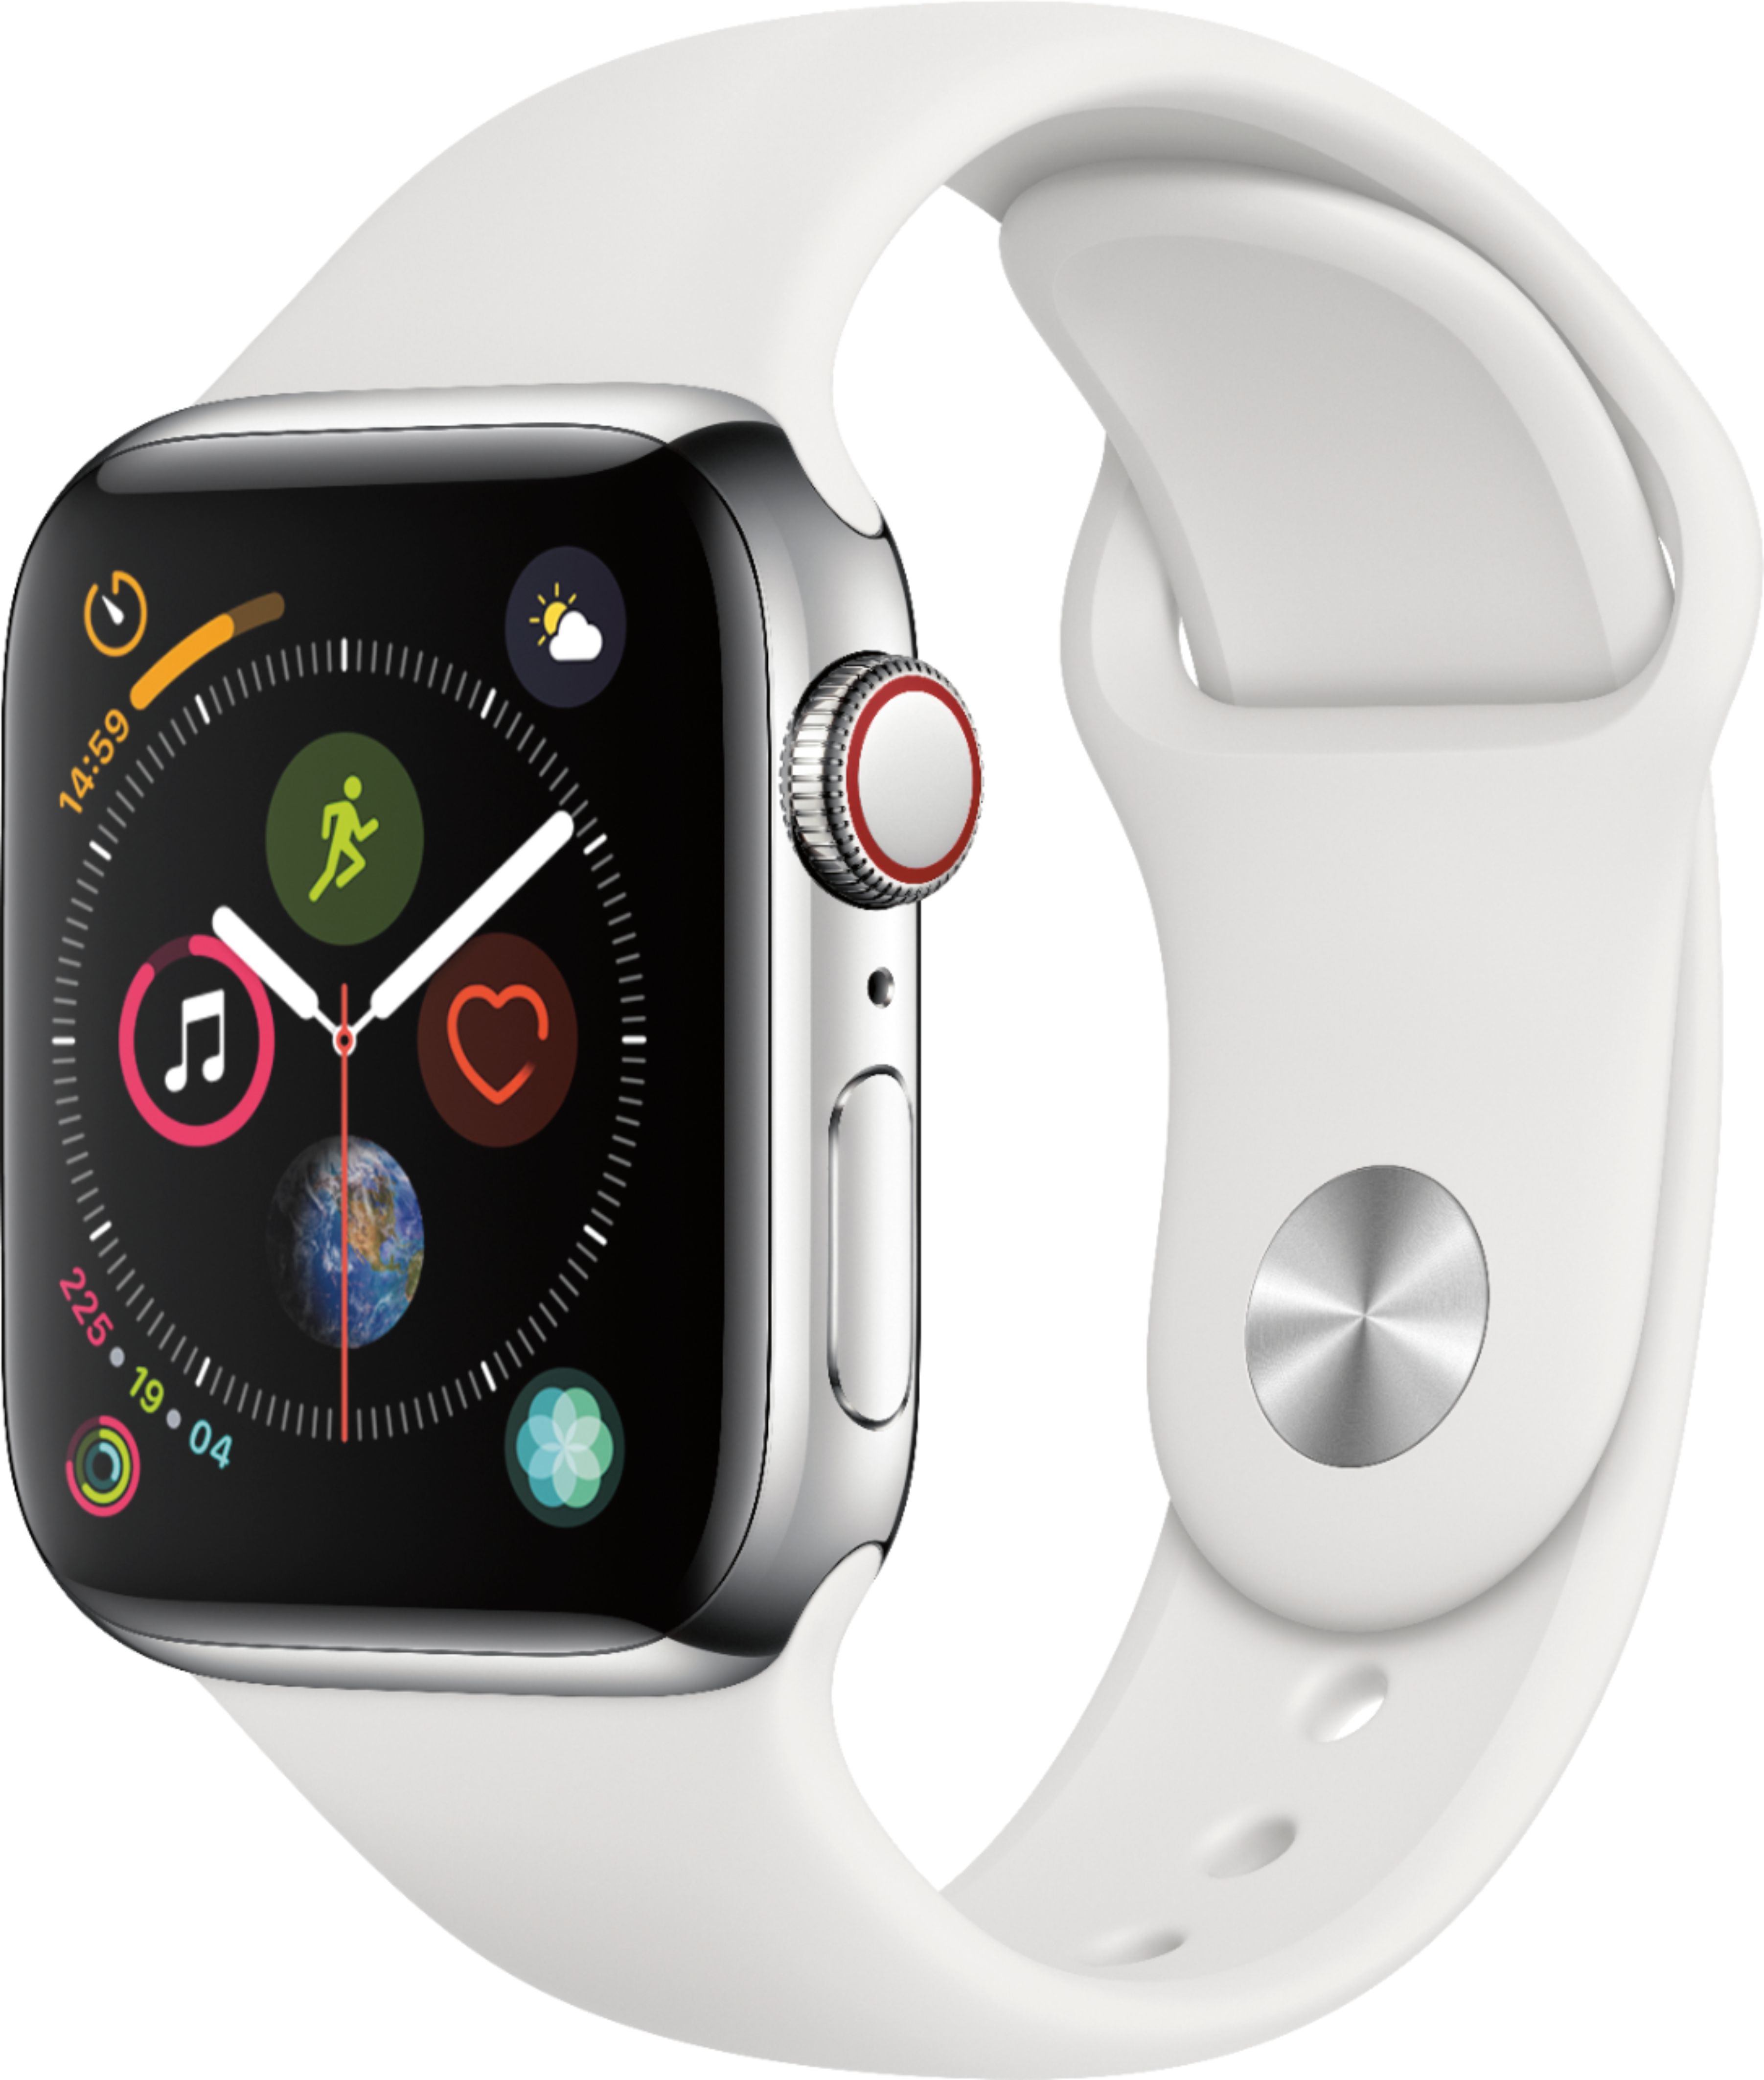 Geek Squad Certified Refurbished Apple Watch Series 4 (GPS + Cellular) 40mm Stainless Steel Case with White Sport Band - Stainless Steel